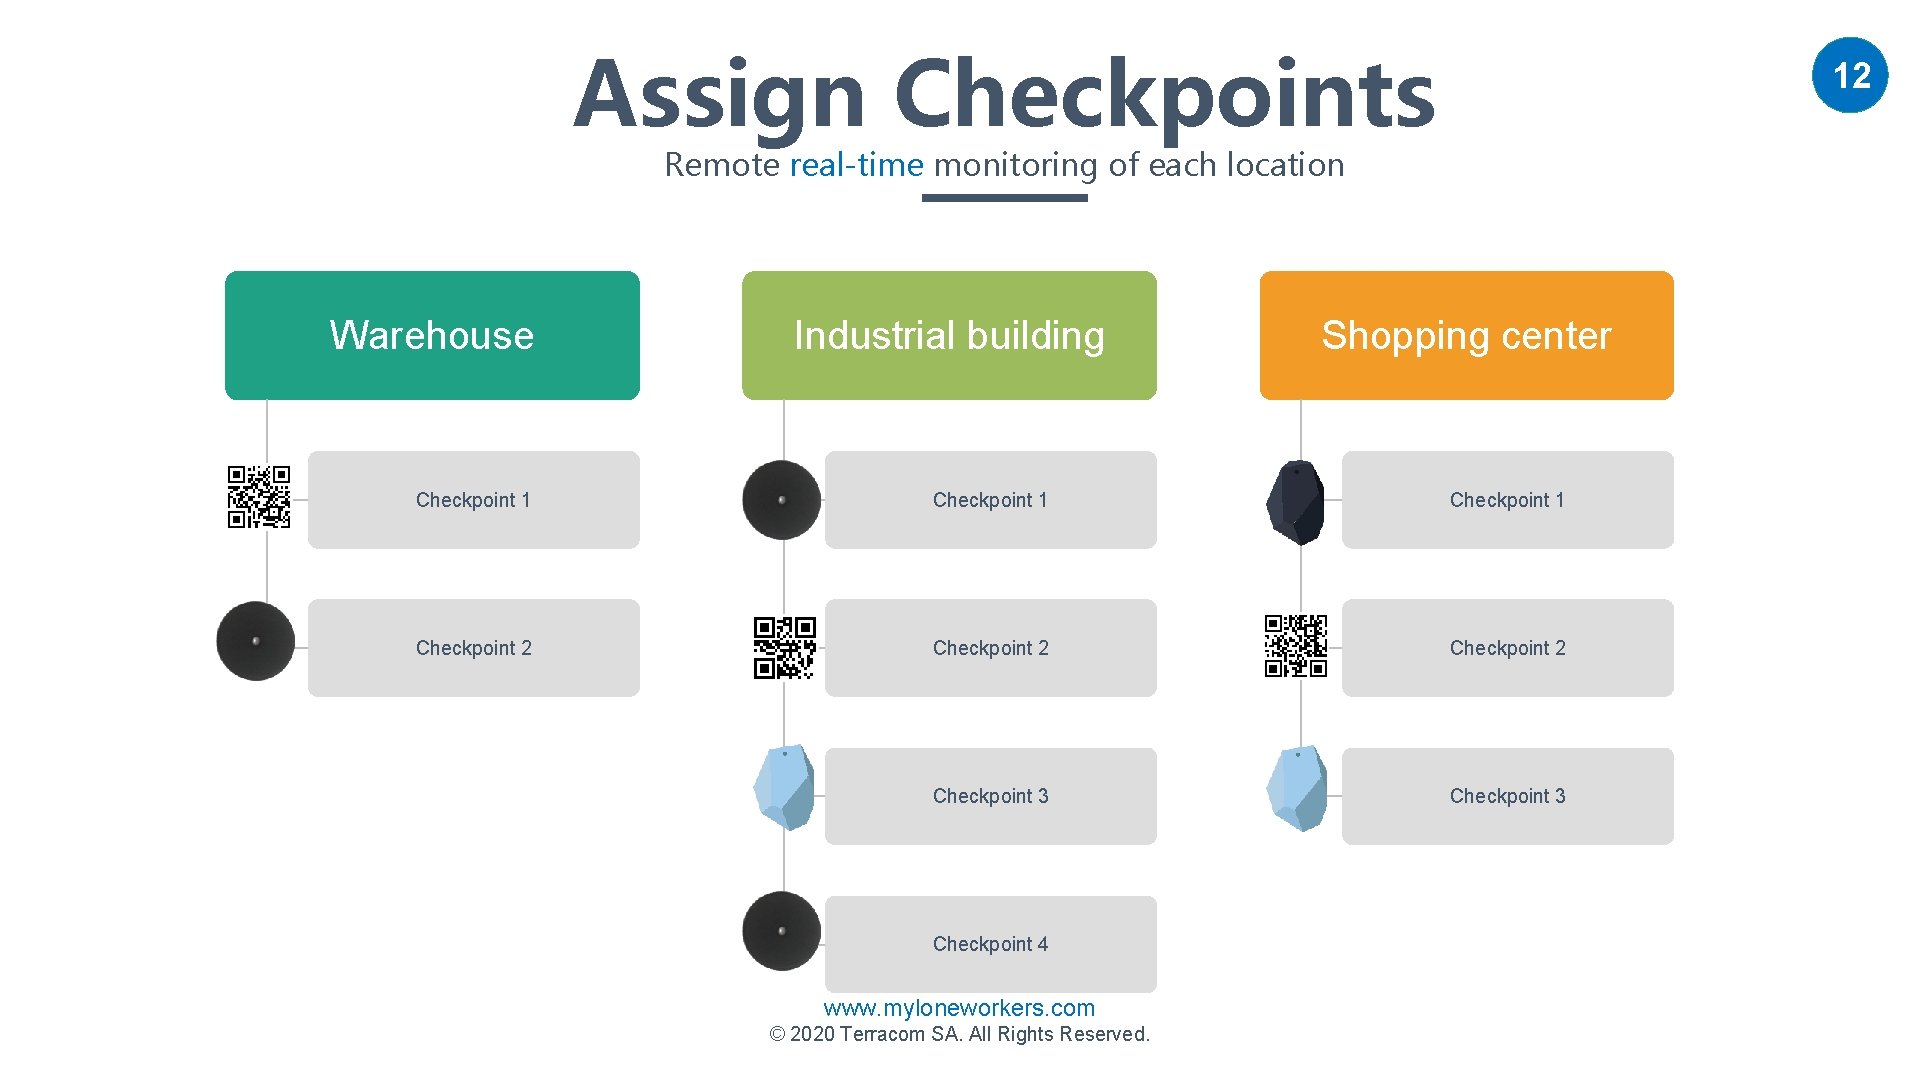 Assign Checkpoints 12 Remote real-time monitoring of each location Warehouse Industrial building Shopping center